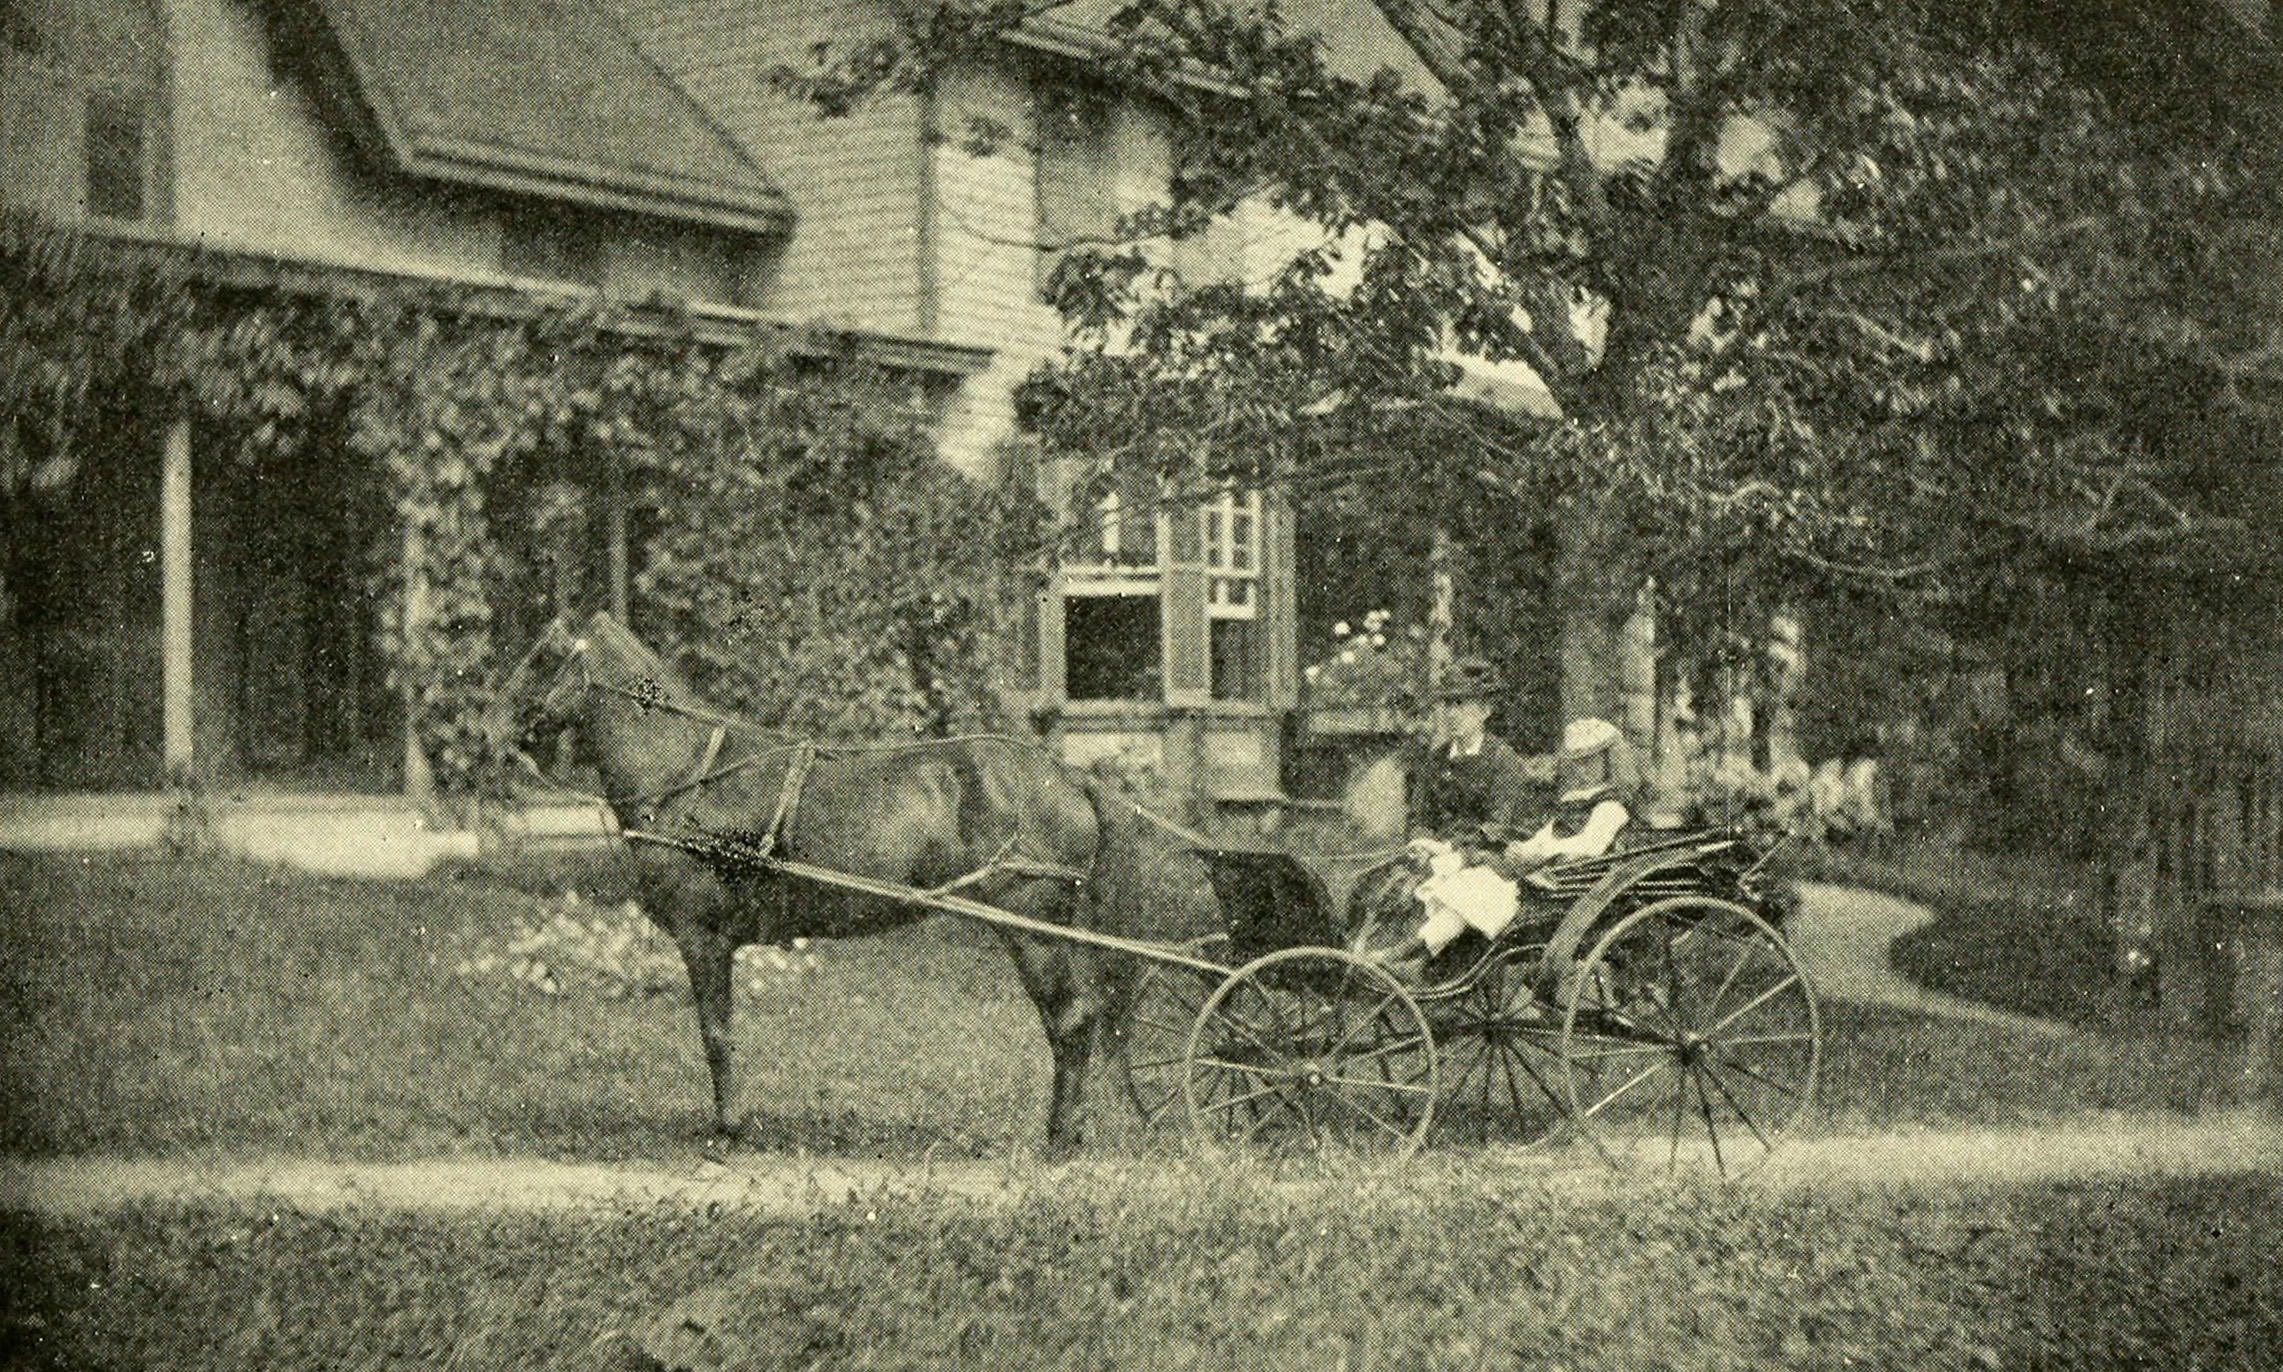 a horse and buggy in front of a wood frame house